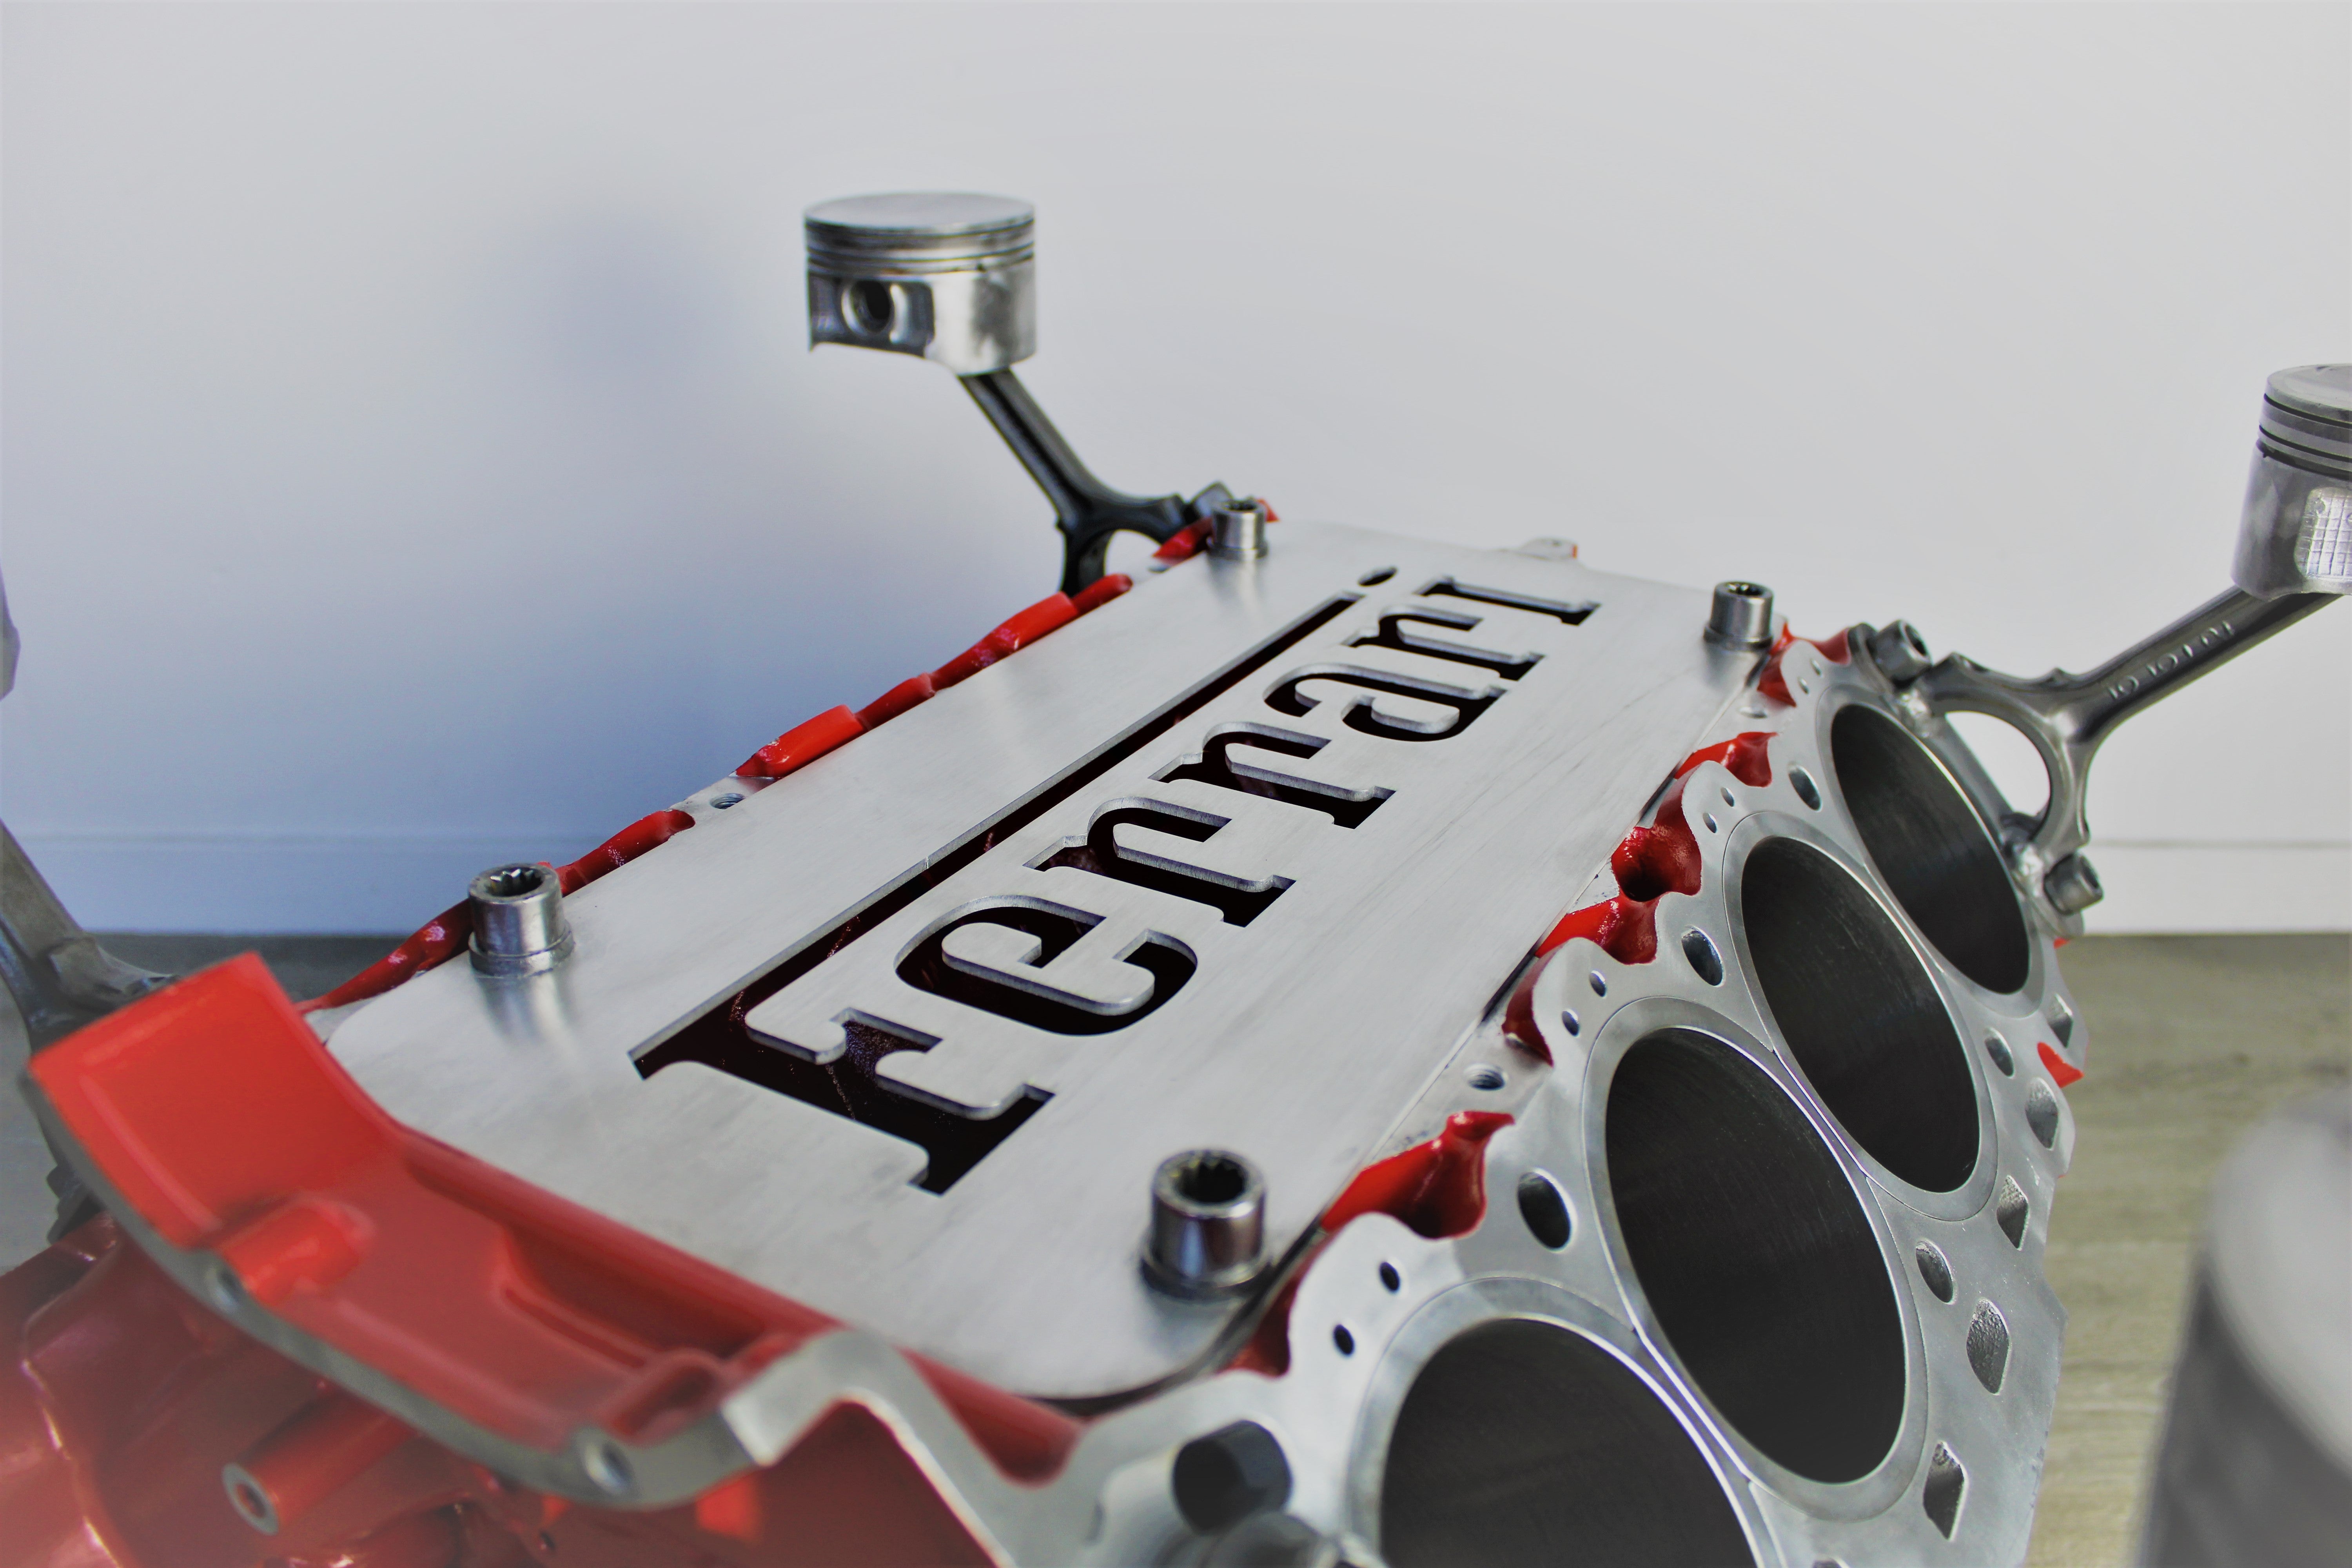 Close-up view of the Ferrari logo displayed on a Ferrari engine block coffee table finished in red without its glass top.